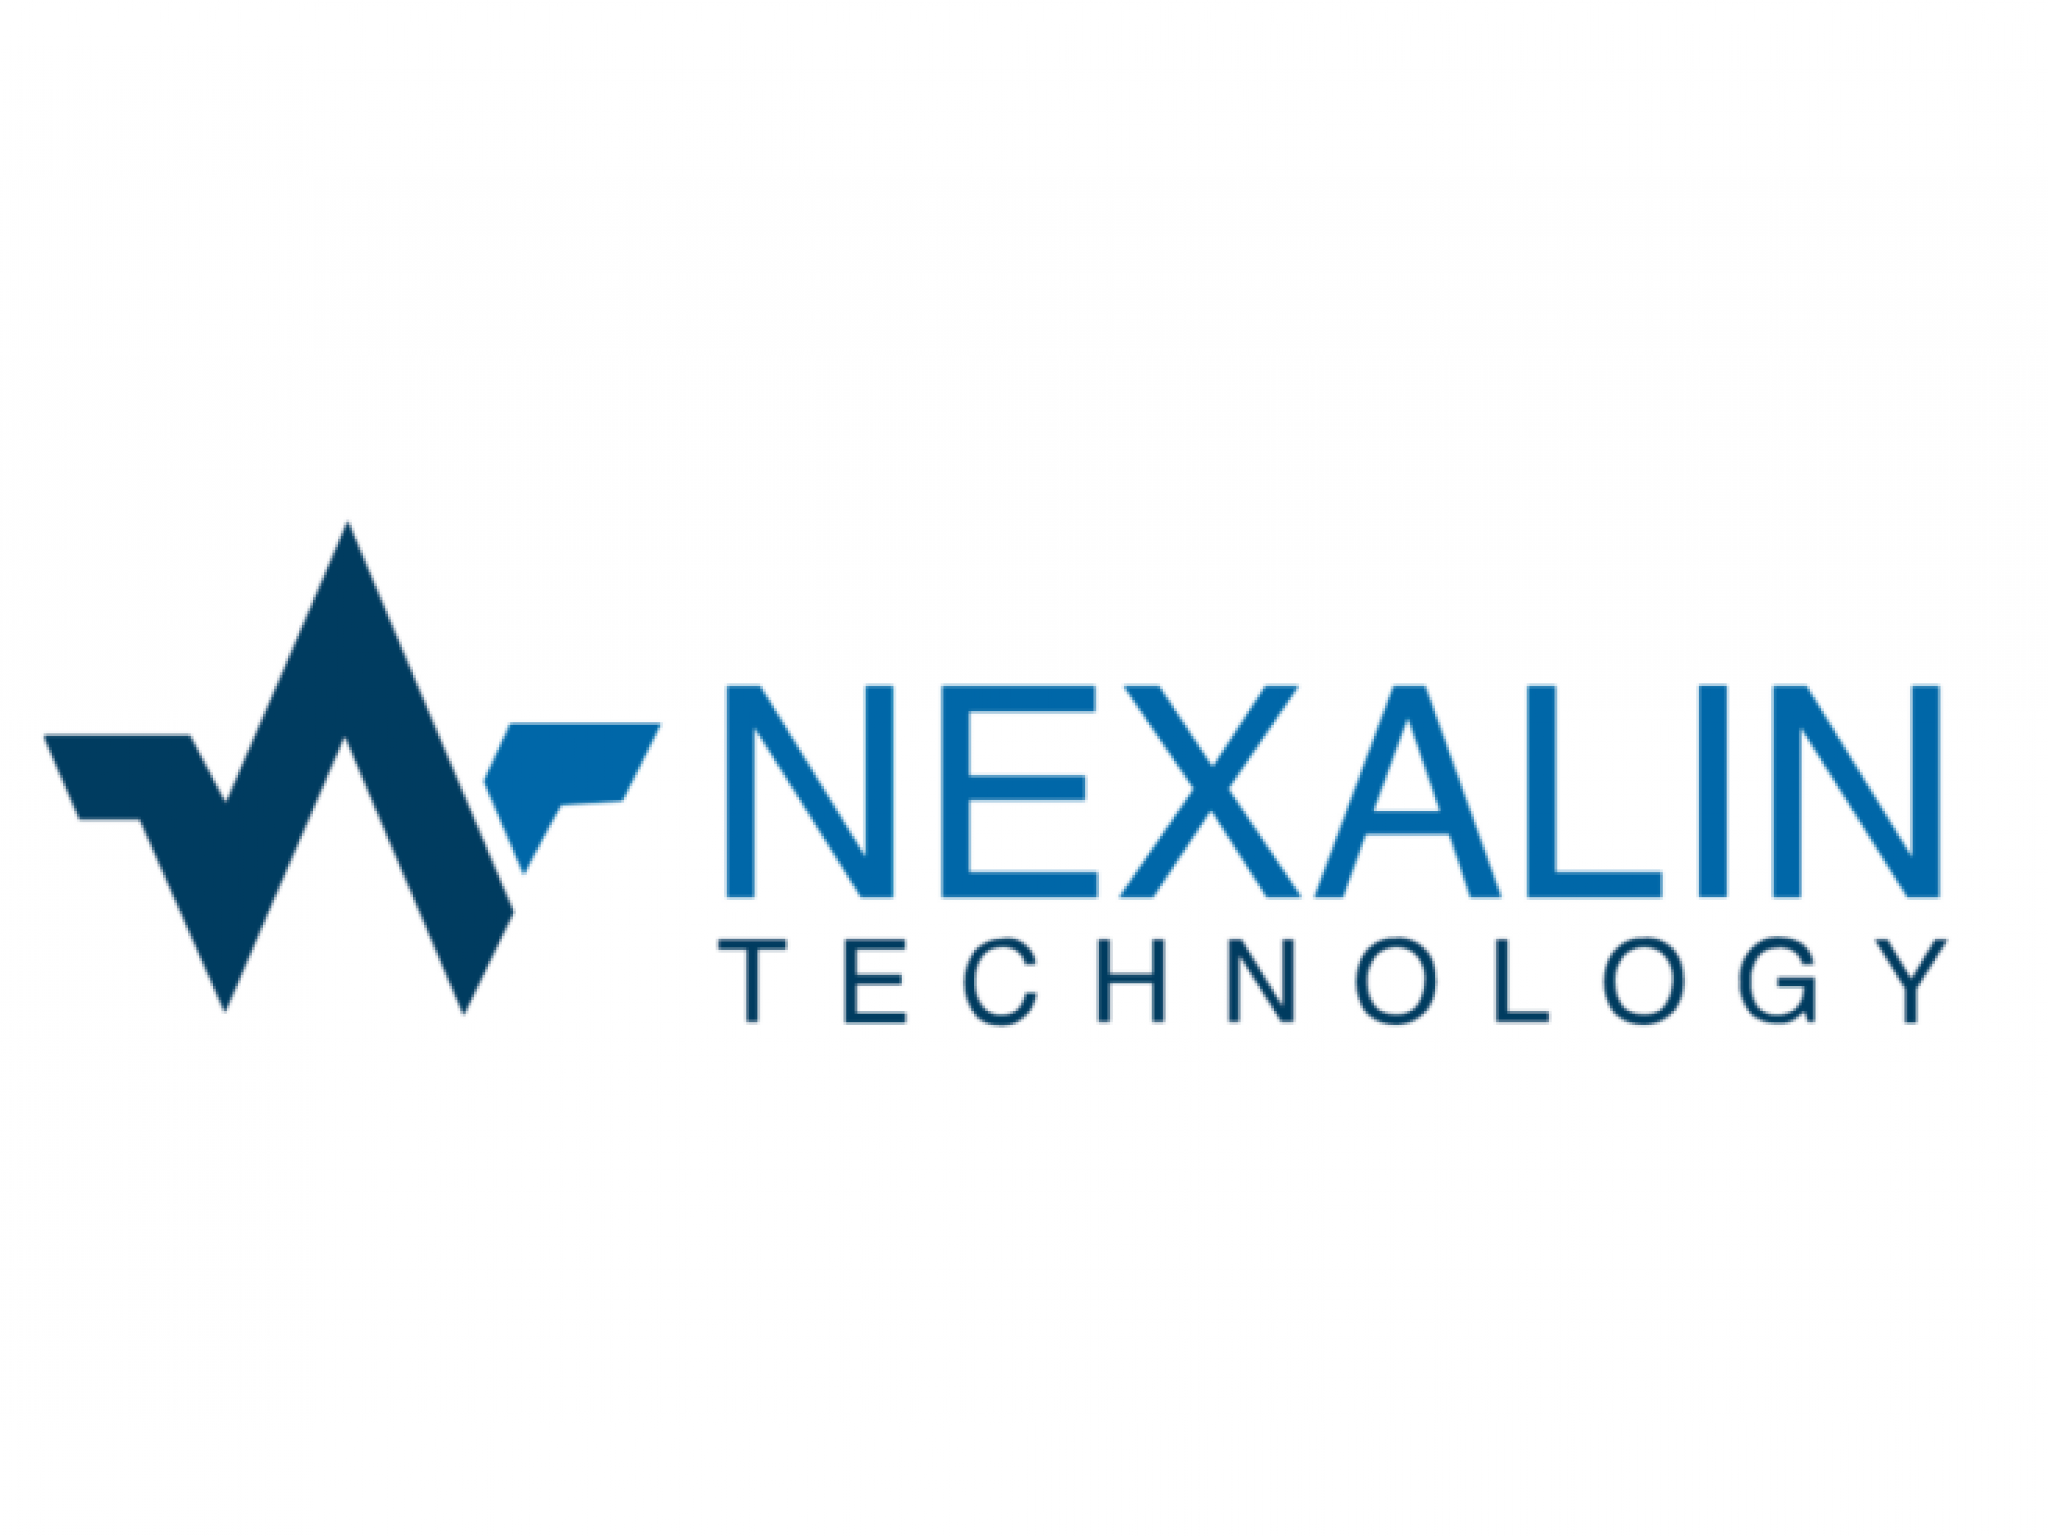  nano-cap-nexalin-technology-secures-us-patent-for-stimulation-device-for-alzheimers-and-dementia-treatment 